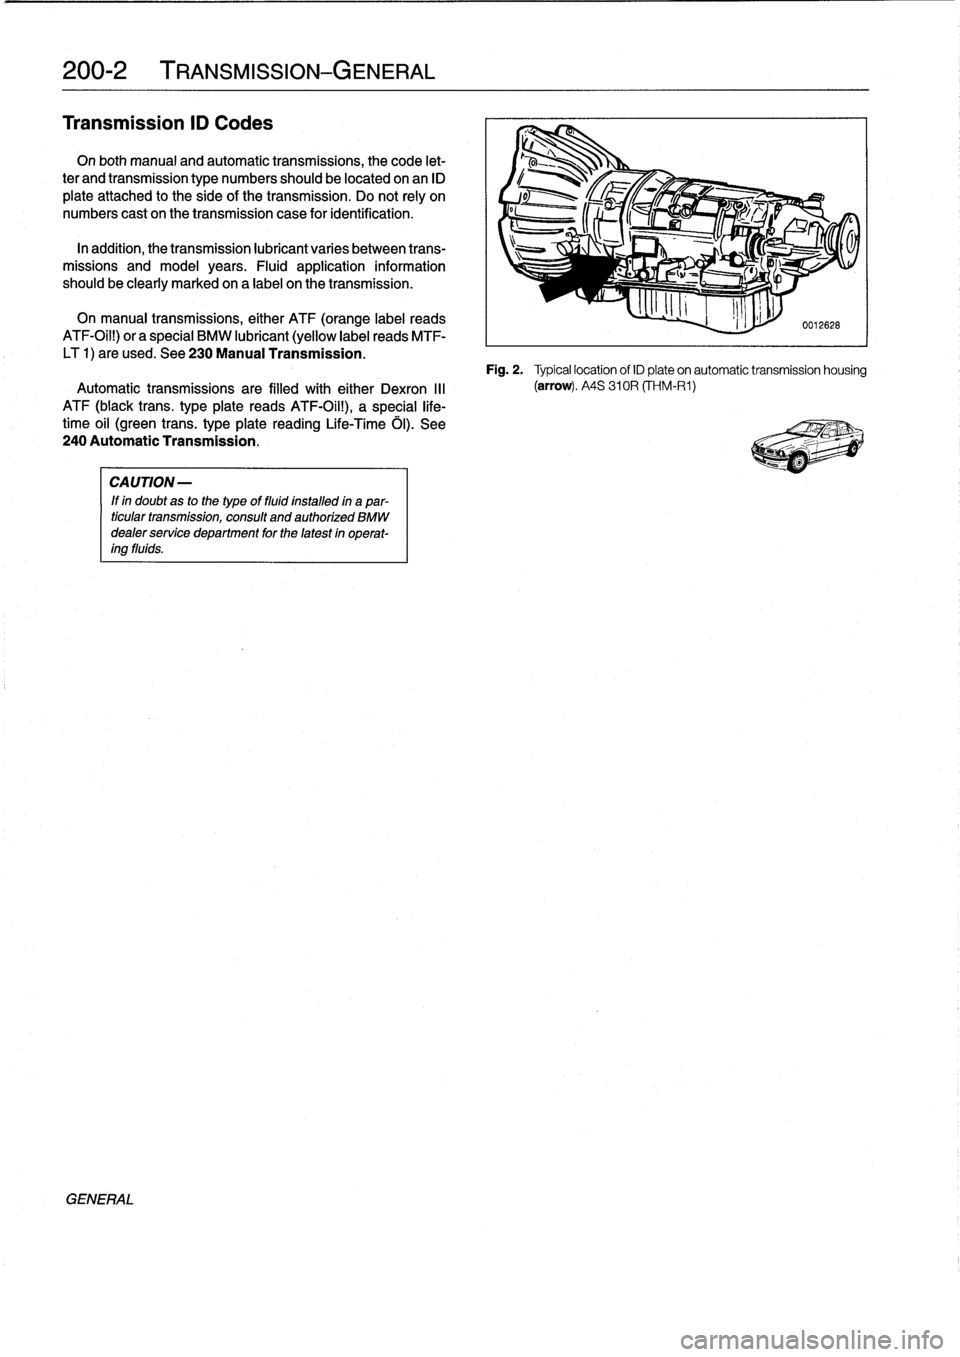 BMW 318i 1998 E36 User Guide 
200-2
TRANSMISSION-GENERAL

Transmission
ID
Codes

On
both
manual
and
automatic
transmissions,
the
code
let-

ter
and
transmission
type
numbers
should
be
located
onan
ID

plate
attached
to
the
síde
